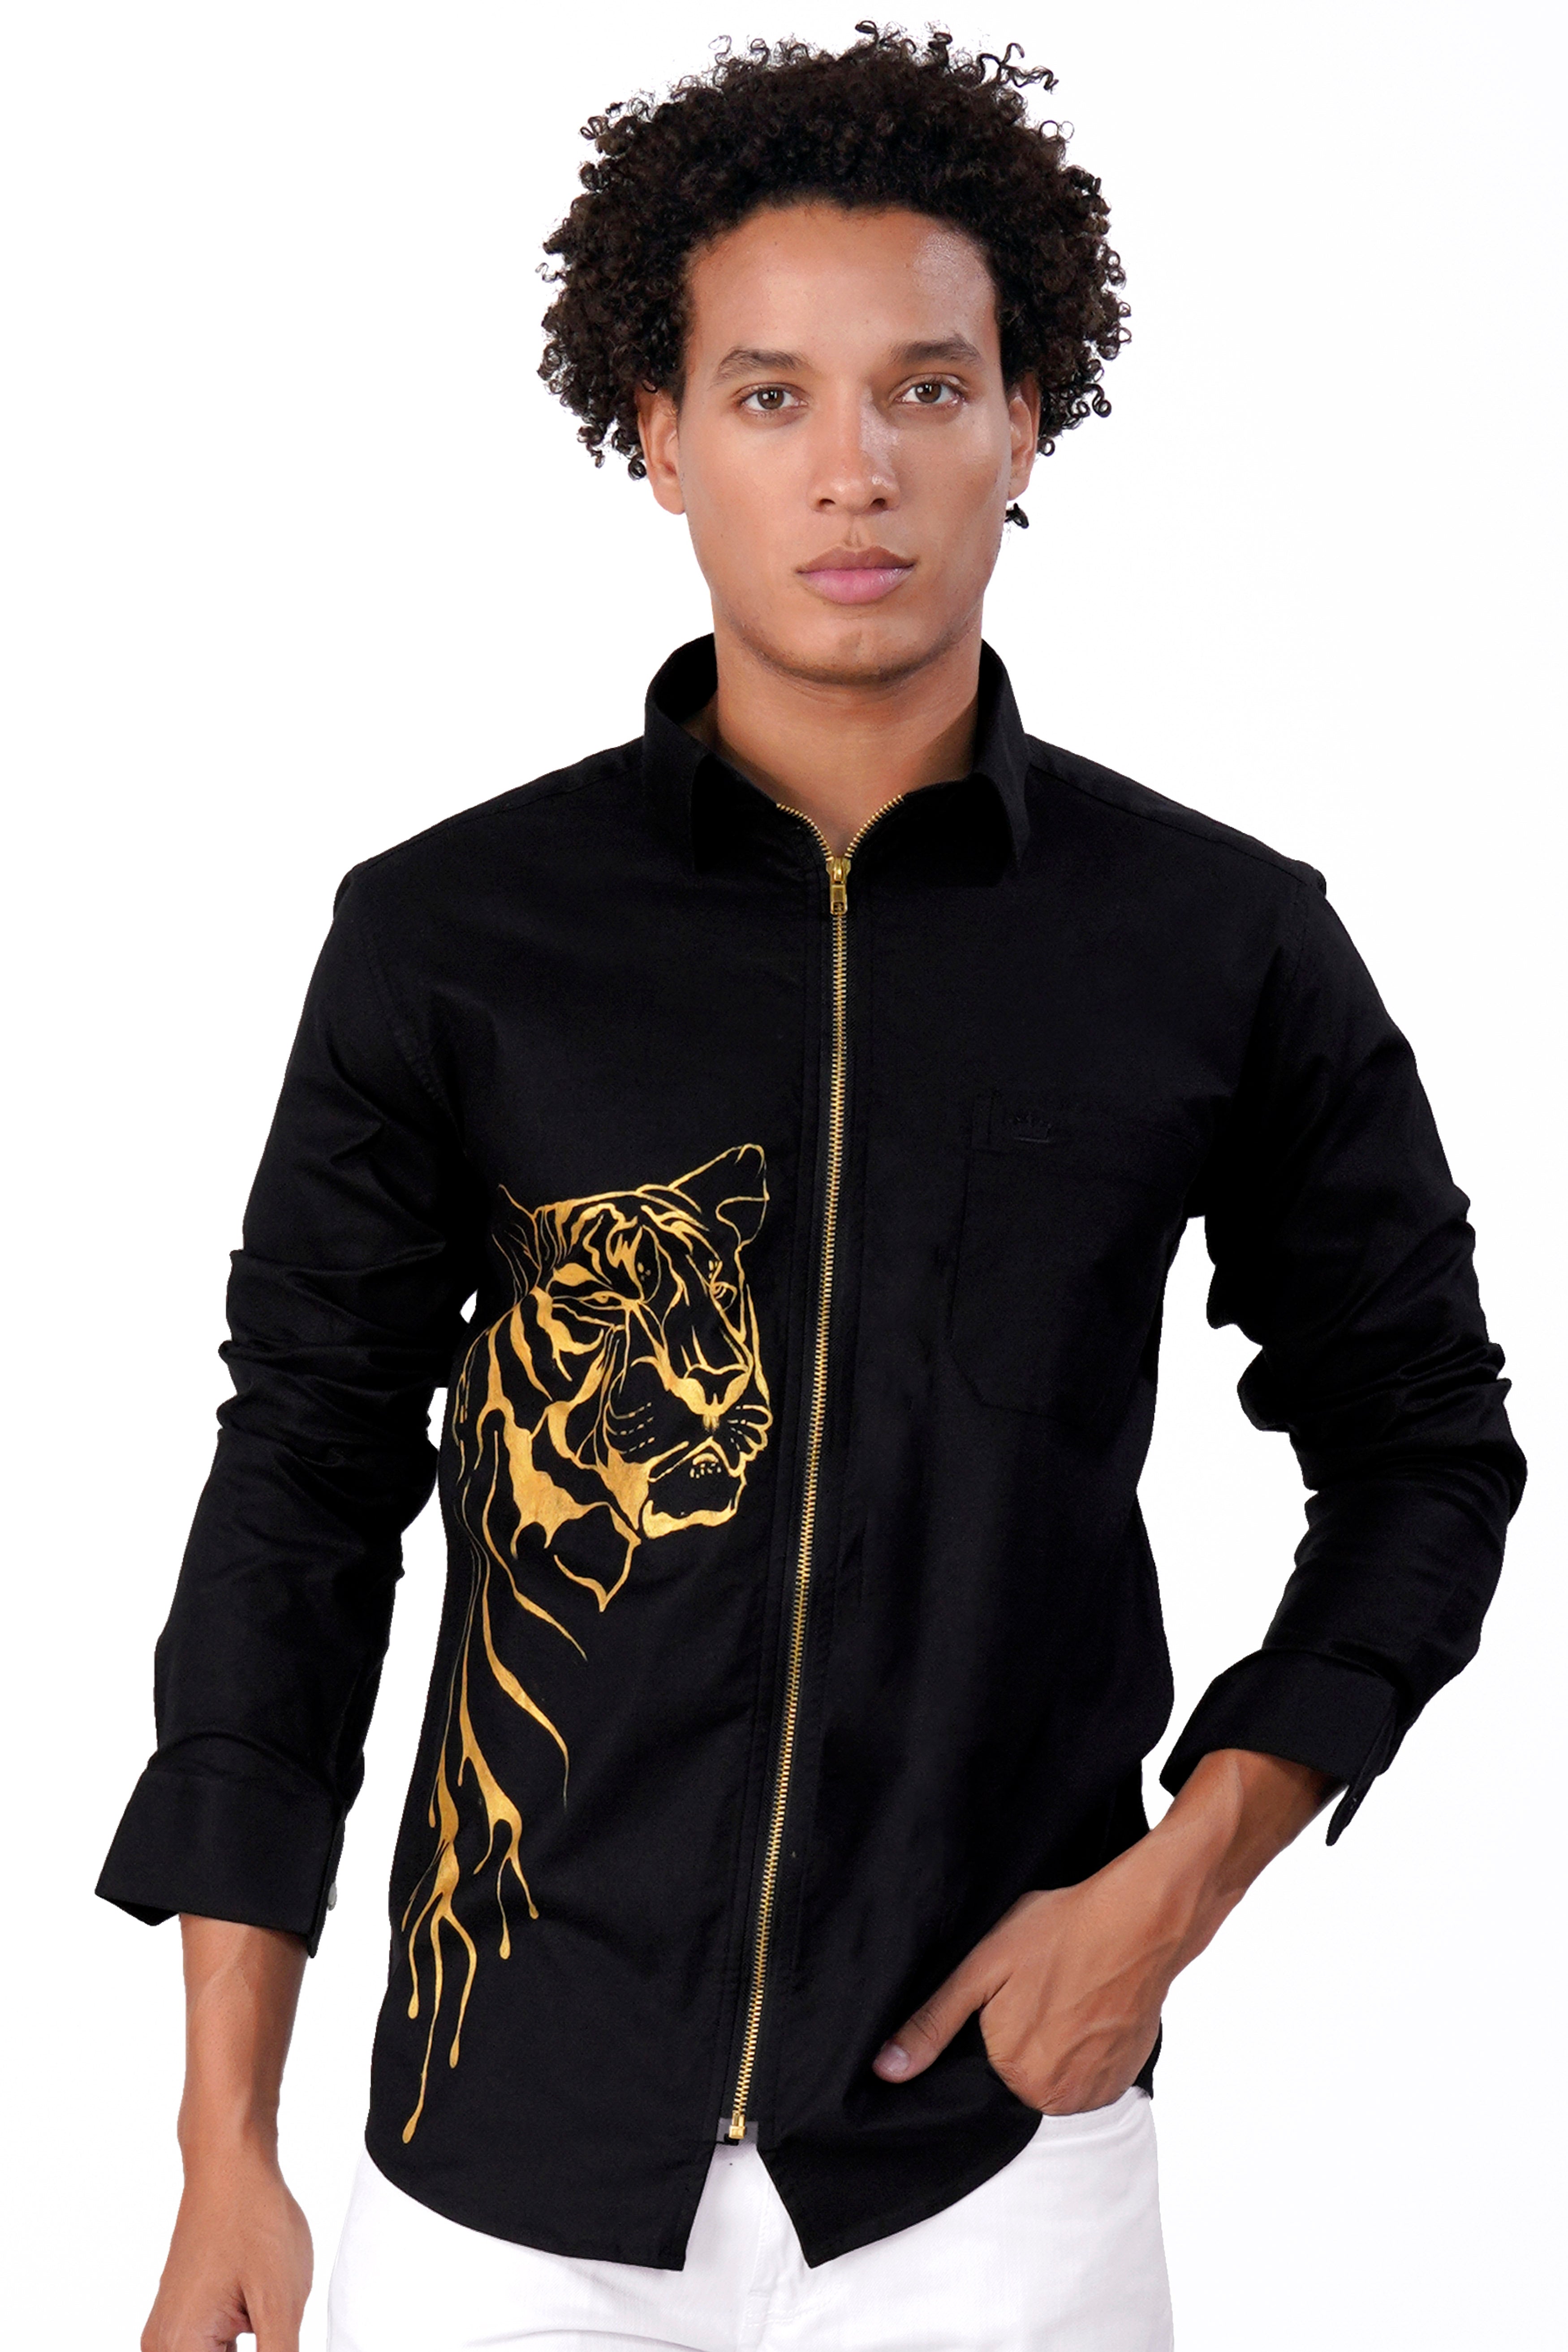 Jade Black with Golden Tiger Hand Painted Royal Oxford Designer Overshirt with Zipper Closure 8516-ZP-P75-ART-38, 8516-ZP-P75-ART-H-38, 8516-ZP-P75-ART-39, 8516-ZP-P75-ART-H-39, 8516-ZP-P75-ART-40, 8516-ZP-P75-ART-H-40, 8516-ZP-P75-ART-42, 8516-ZP-P75-ART-H-42, 8516-ZP-P75-ART-44, 8516-ZP-P75-ART-H-44, 8516-ZP-P75-ART-46, 8516-ZP-P75-ART-H-46, 8516-ZP-P75-ART-48, 8516-ZP-P75-ART-H-48, 8516-ZP-P75-ART-50, 8516-ZP-P75-ART-H-50, 8516-ZP-P75-ART-52, 8516-ZP-P75-ART-H-52